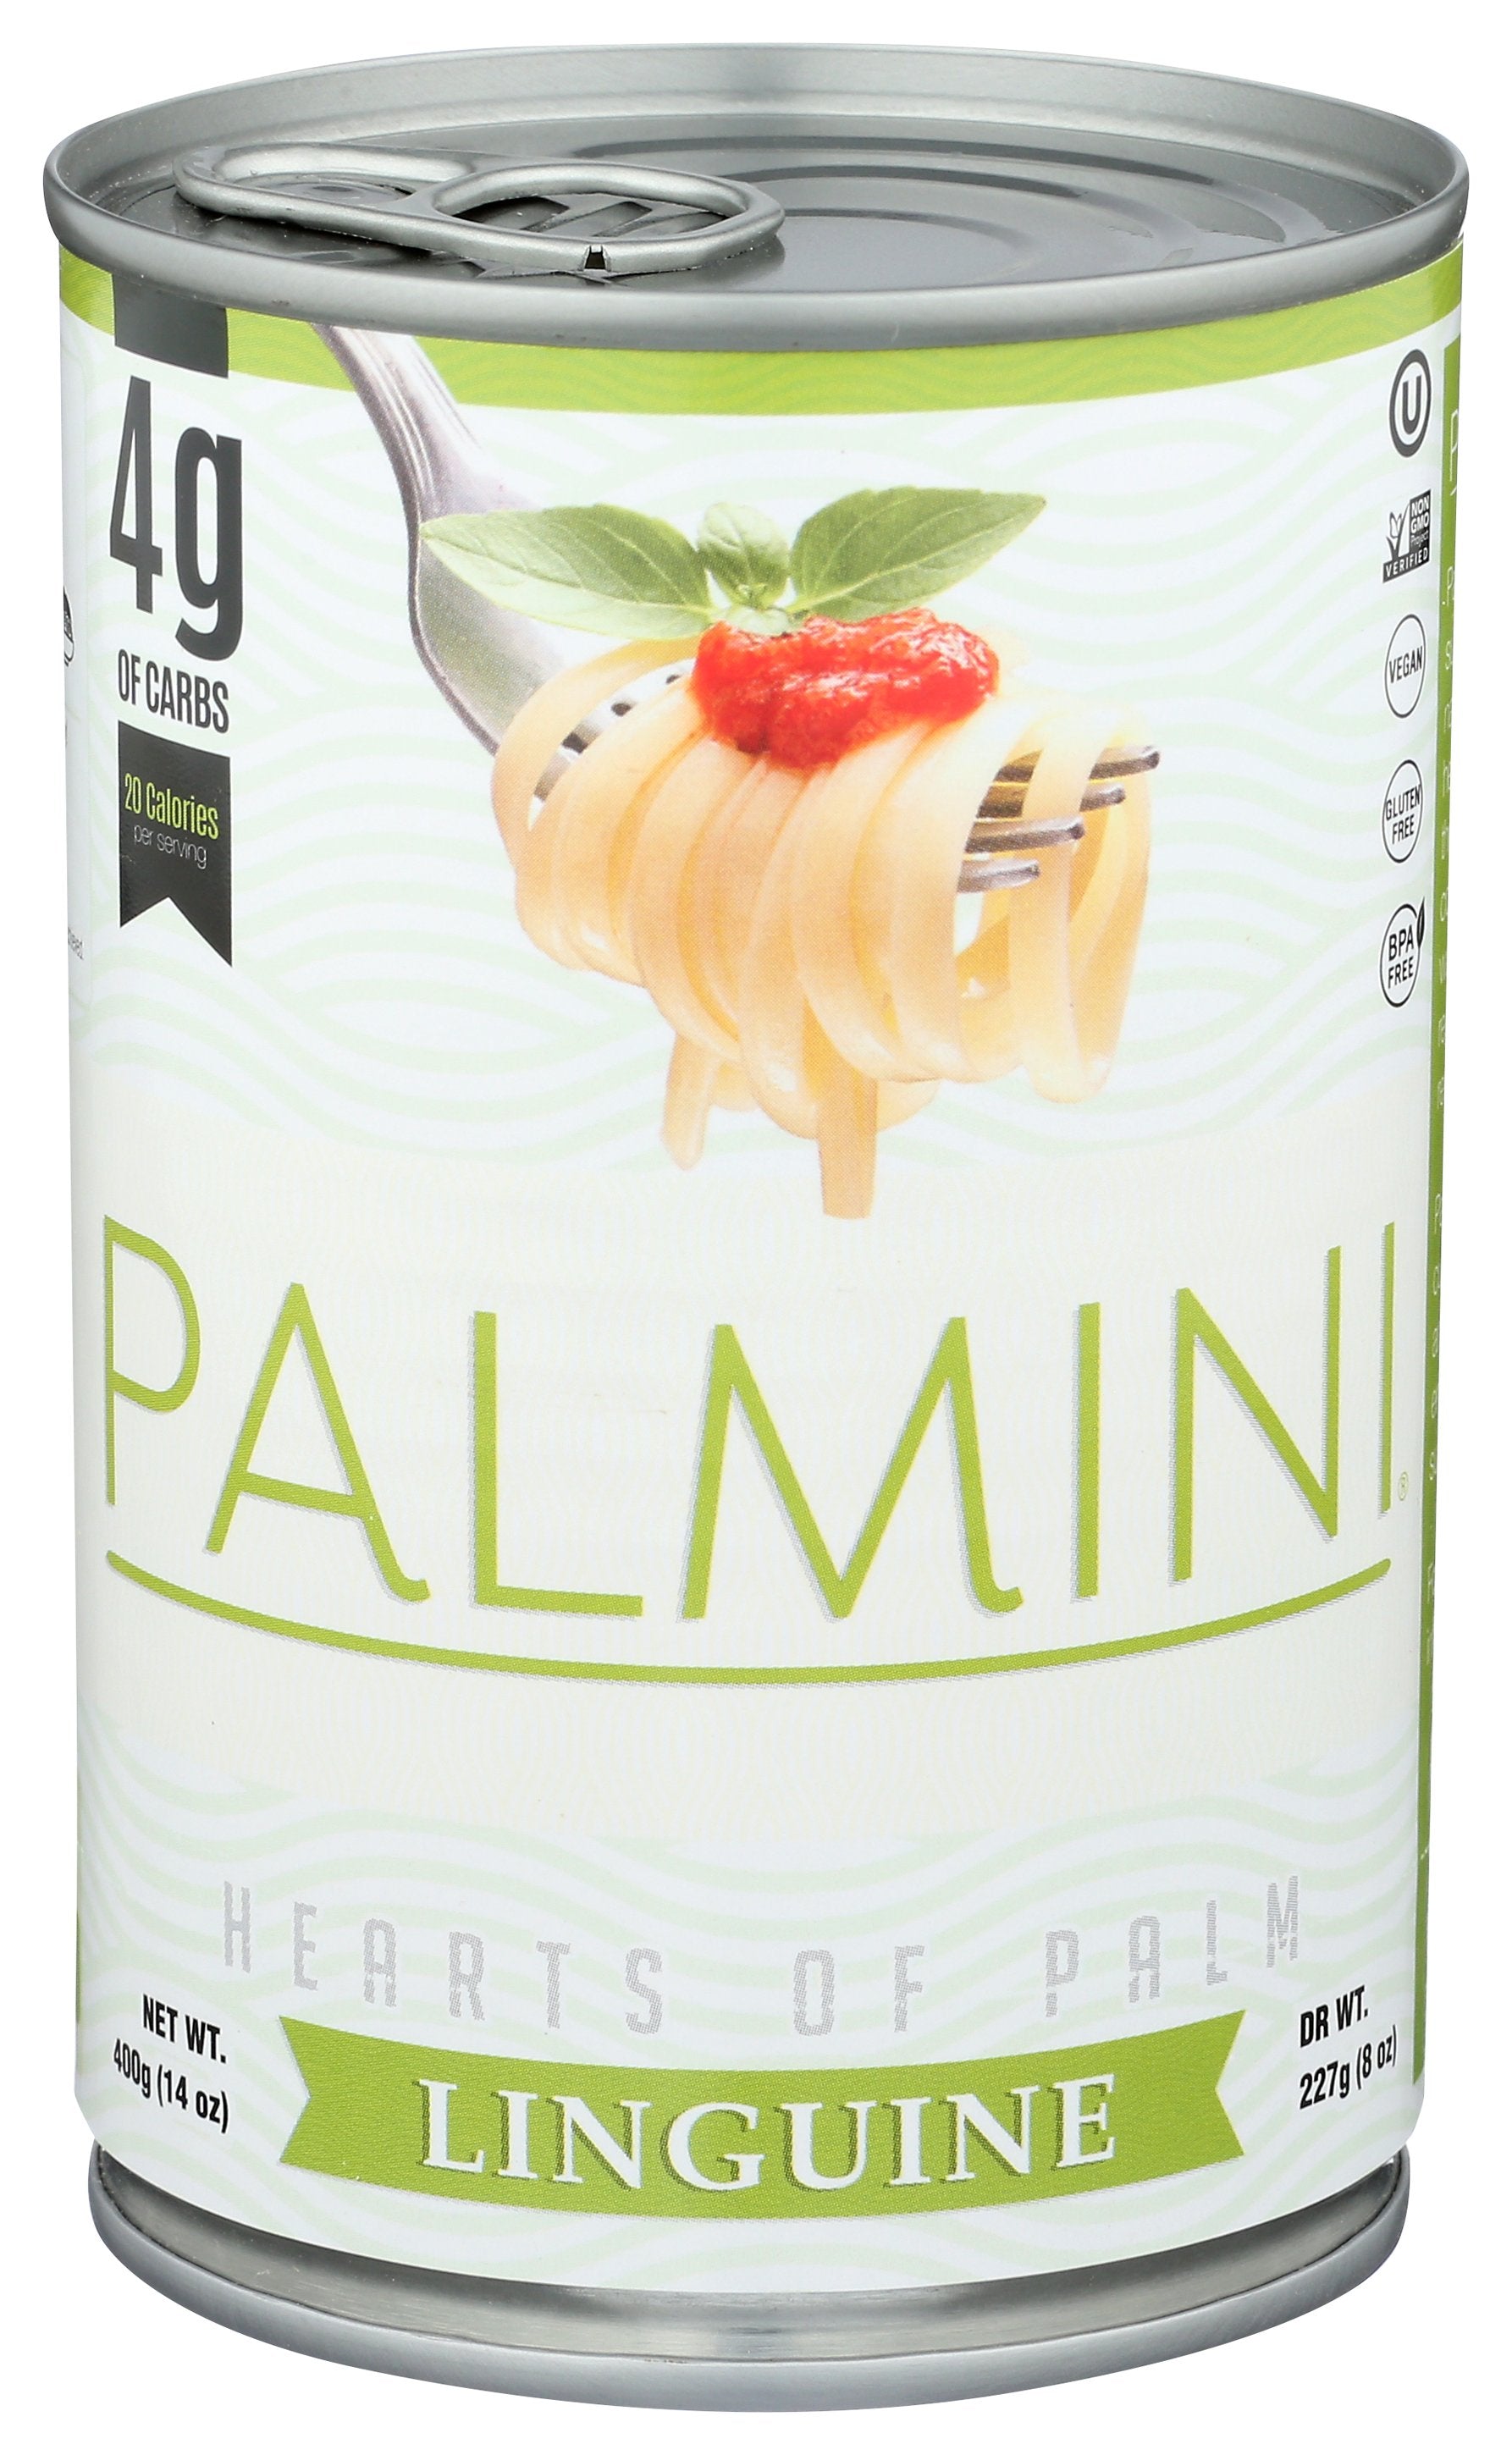 PALMINI PASTA HRTS OF PALM CAN - Case of 6